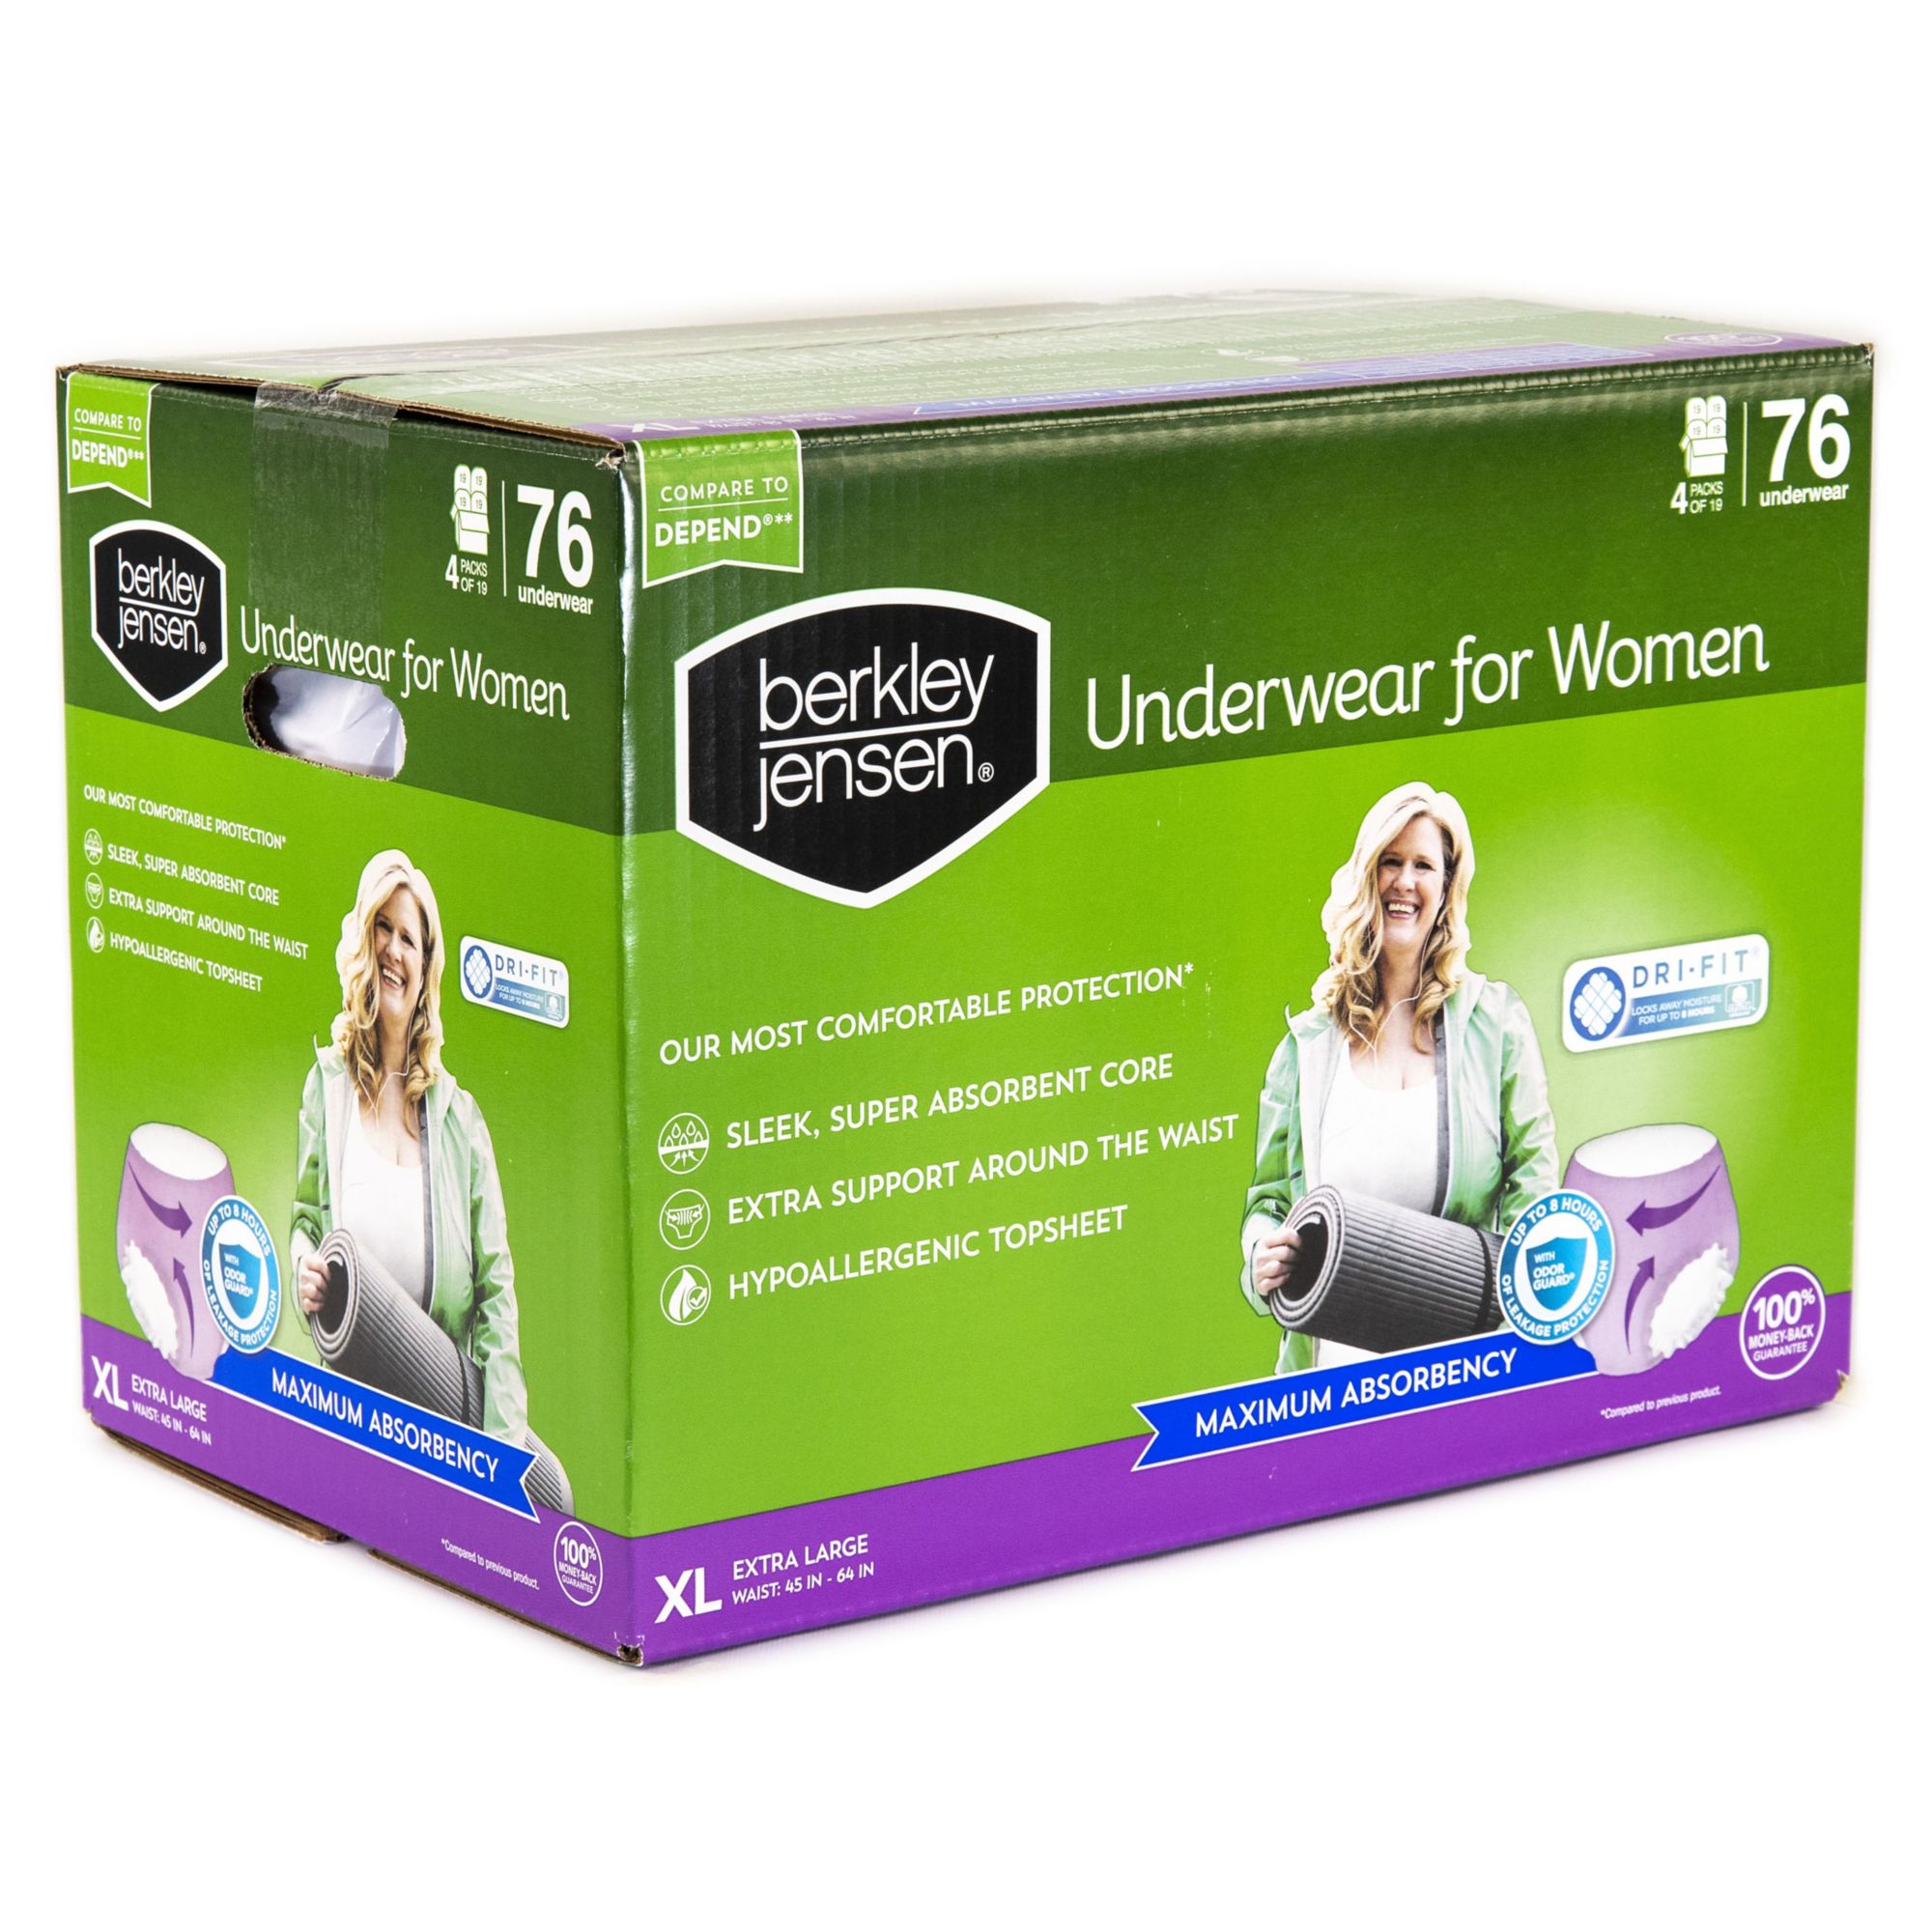 Depend Fresh Protection Adult Incontinence Underwear for Women, Large -  Blush, 84 ct.